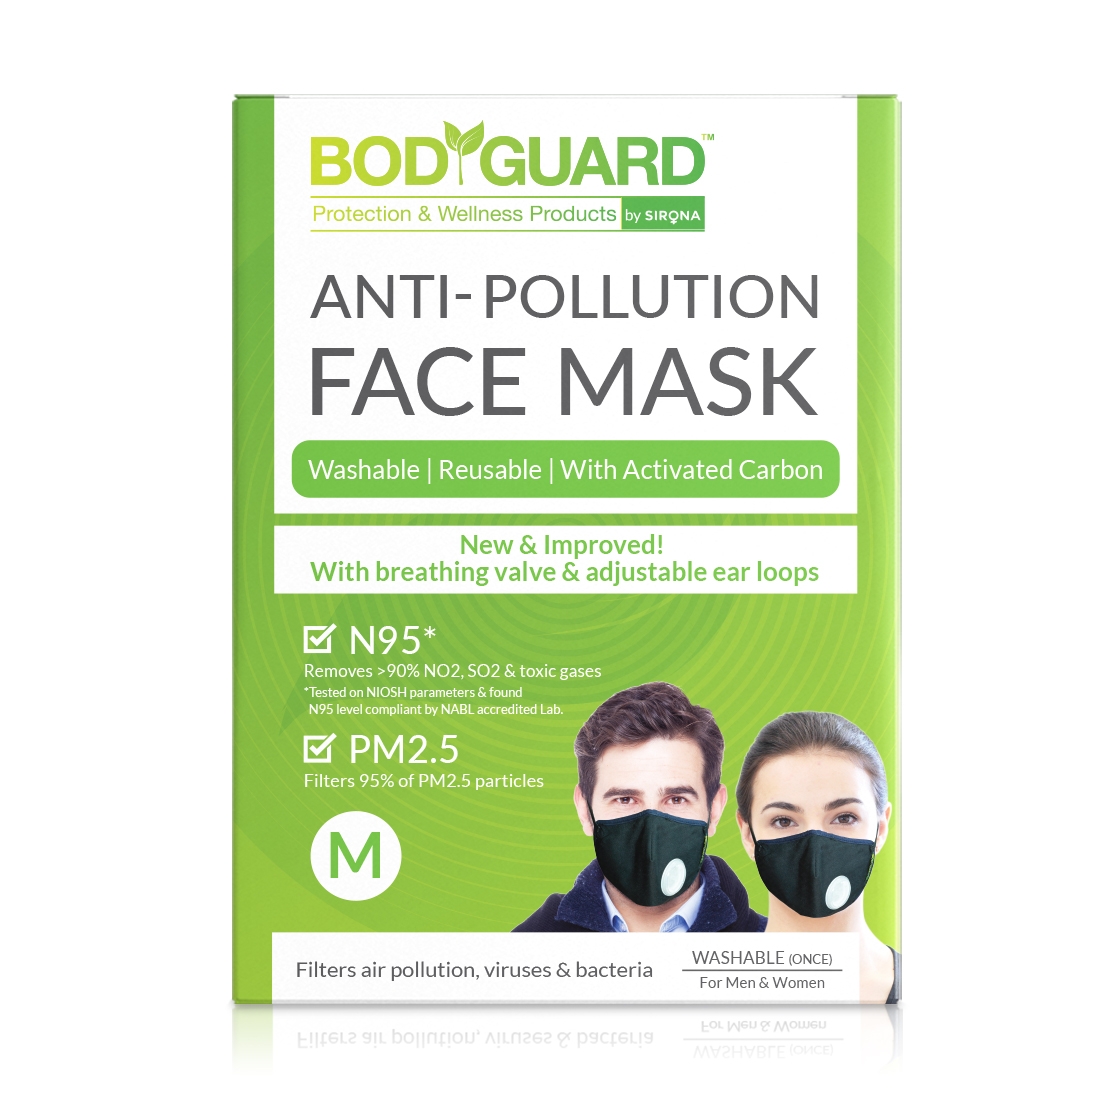 Bodyguard | Bodyguard N95 + PM2.5 Anti Pollution Face Mask with Valve and Activated Carbon - Medium